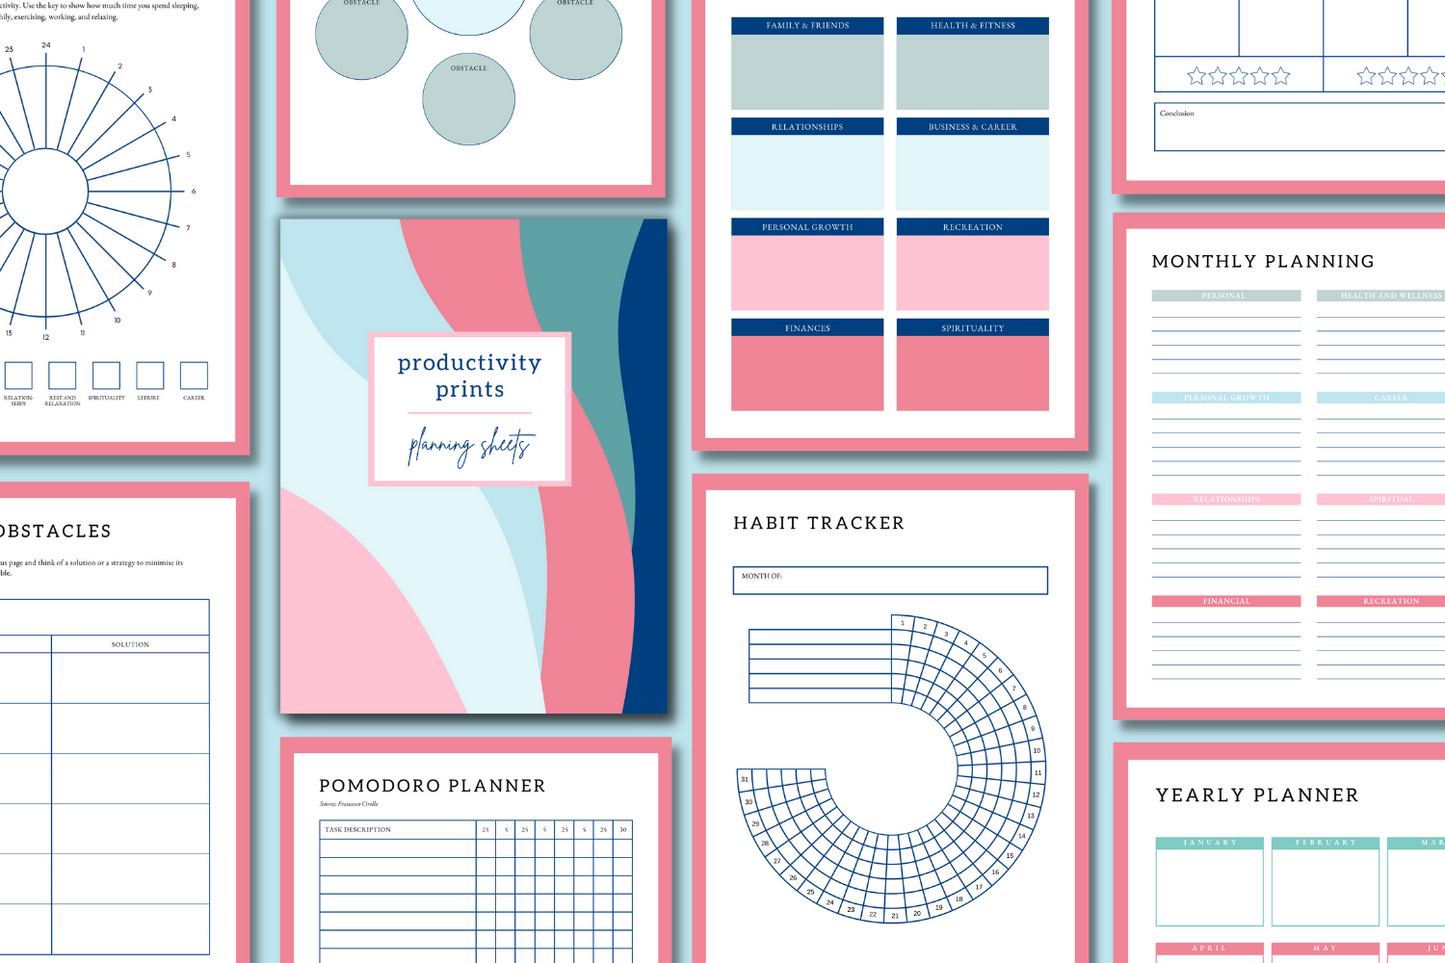 Productivity Prints planning sheets mockup of printable pages. Pomodoro planner, Habit tracker, Monthly planning, Yearly planner.